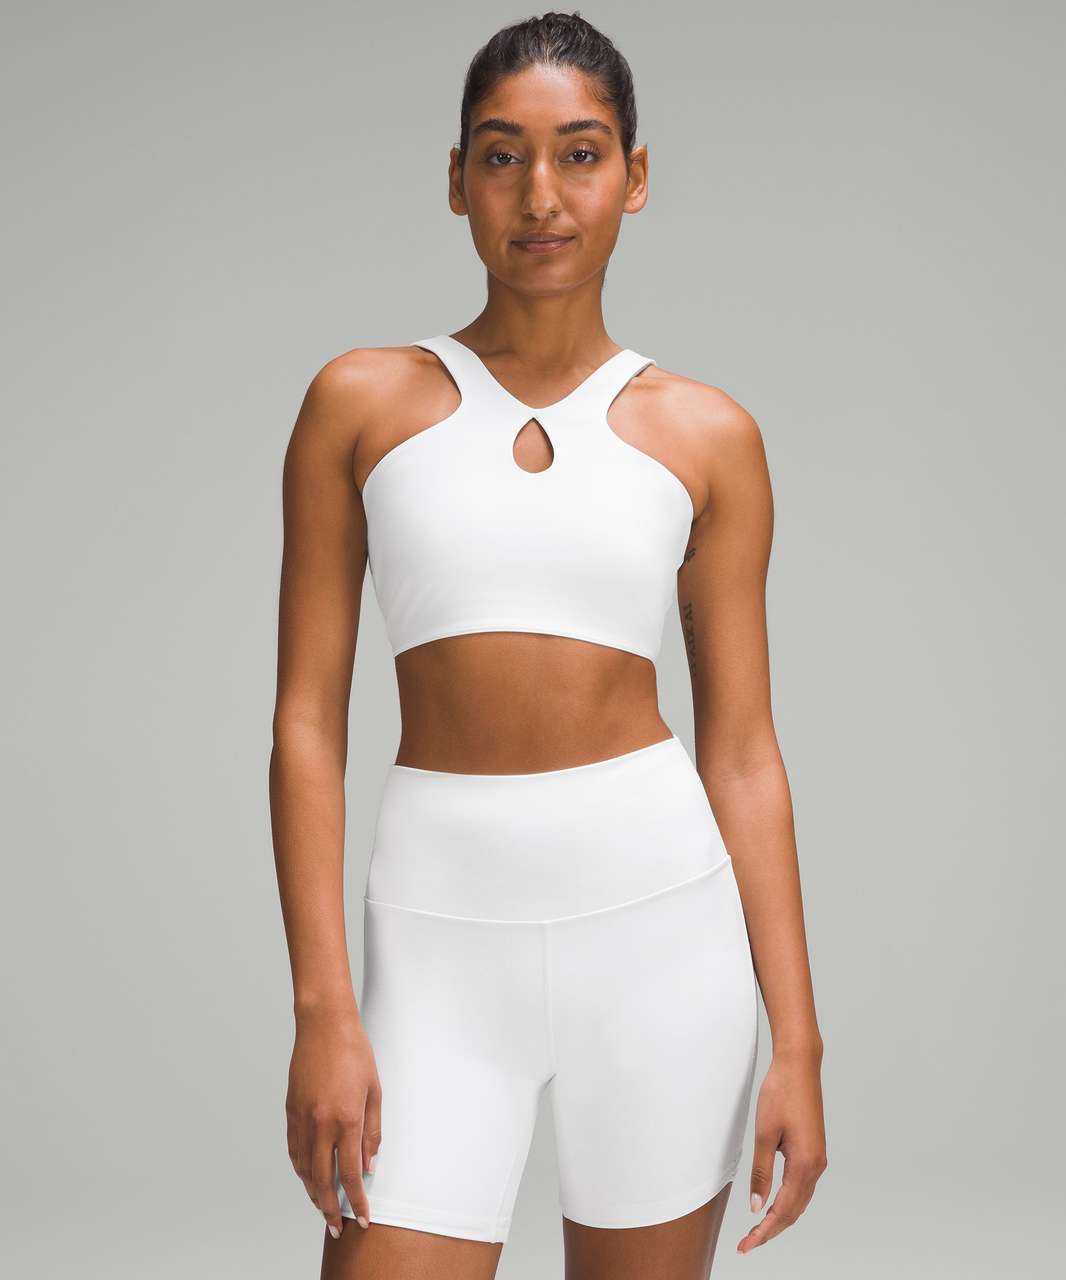 Lululemon SmoothCover Front Cut-Out Yoga Bra *Light Support, A/B Cup - White